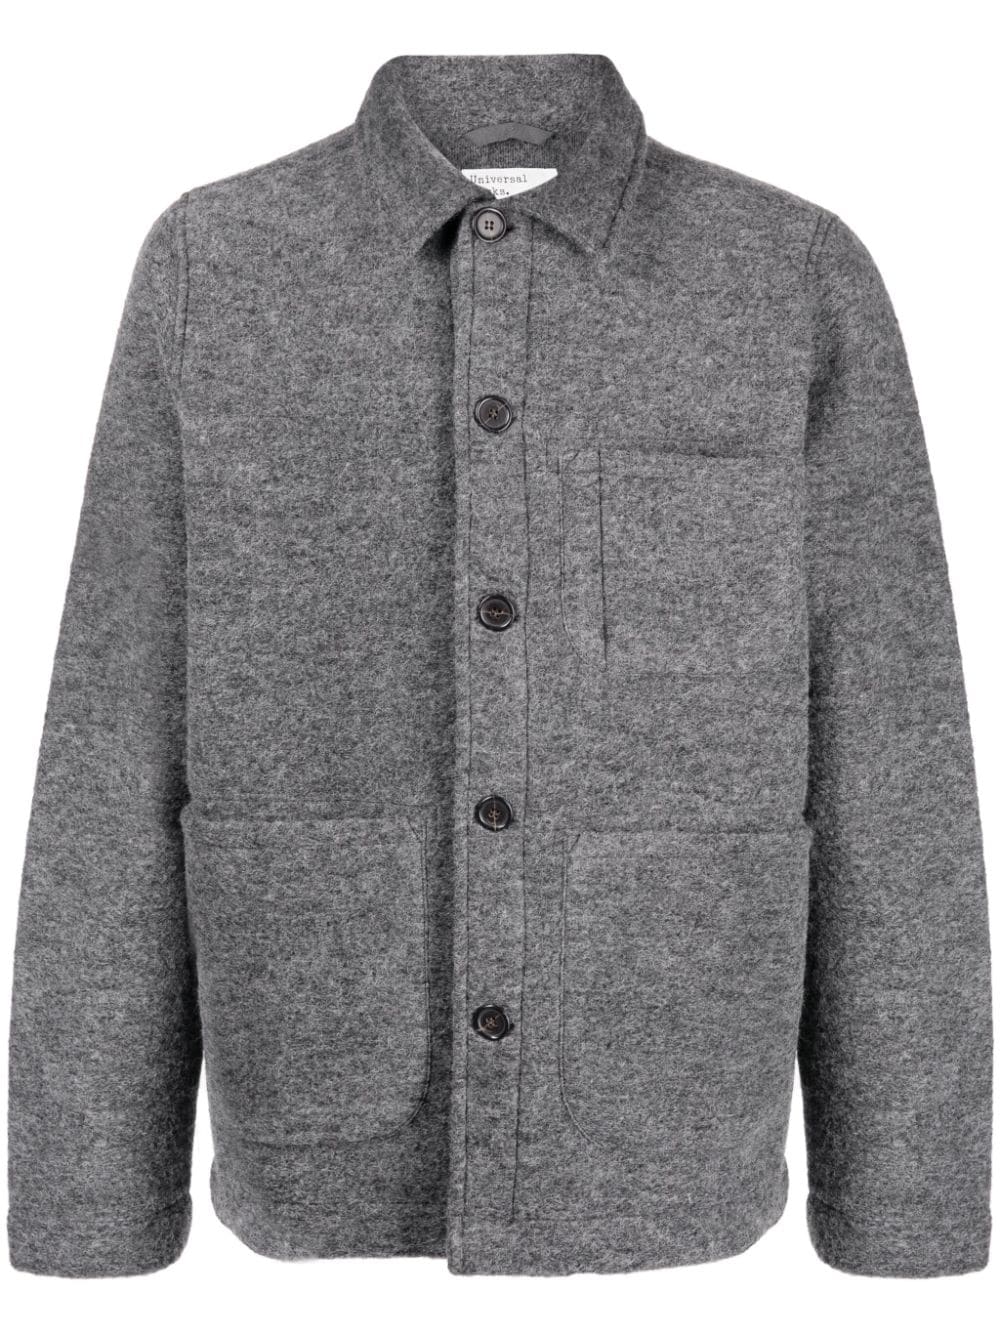 Image 1 of Universal Works buttoned shirt jacket